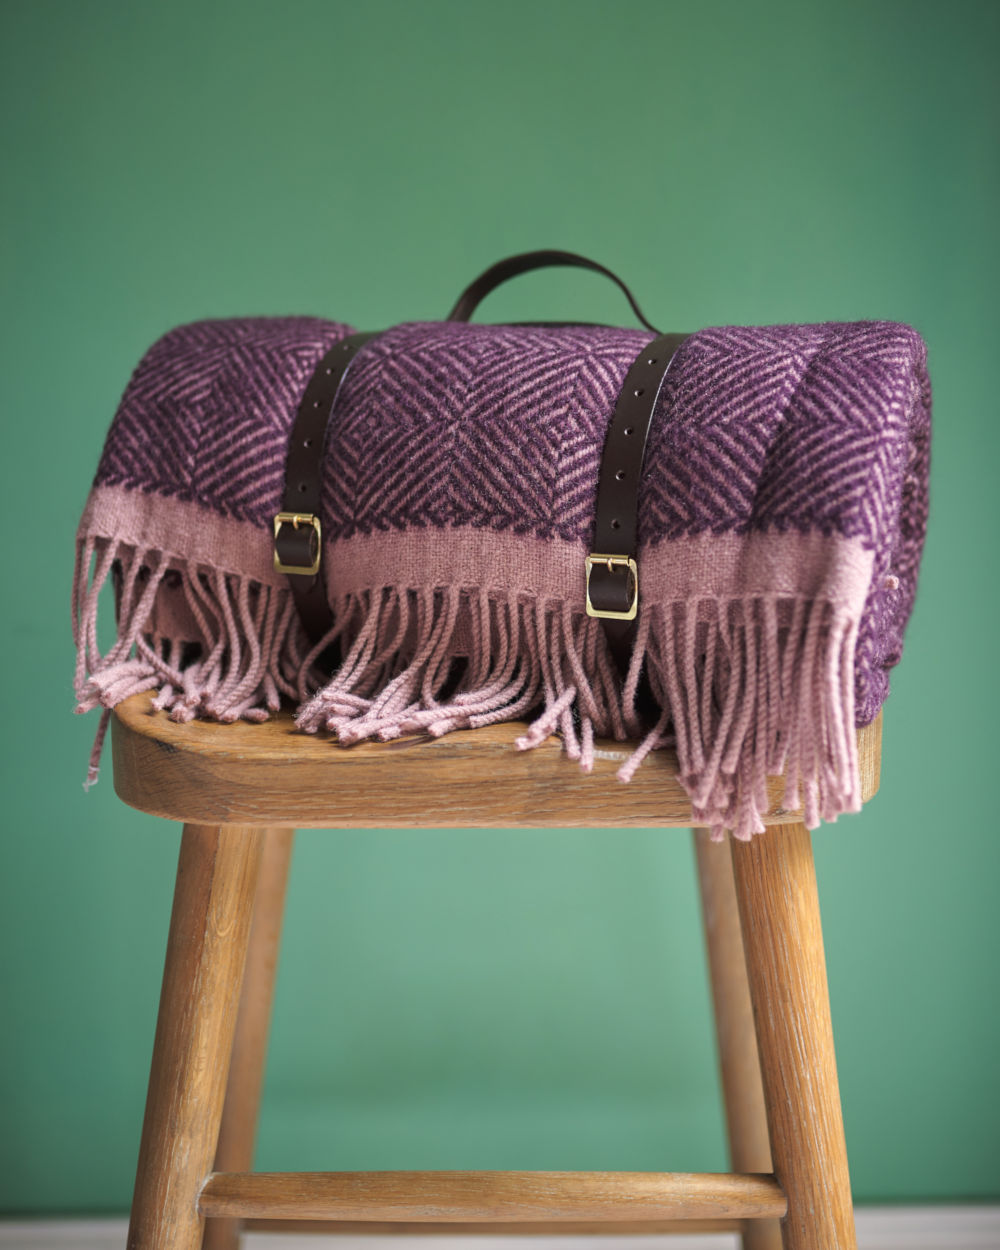 Purple wool picnic blanket with leather straps on stool from The British Blanket Company